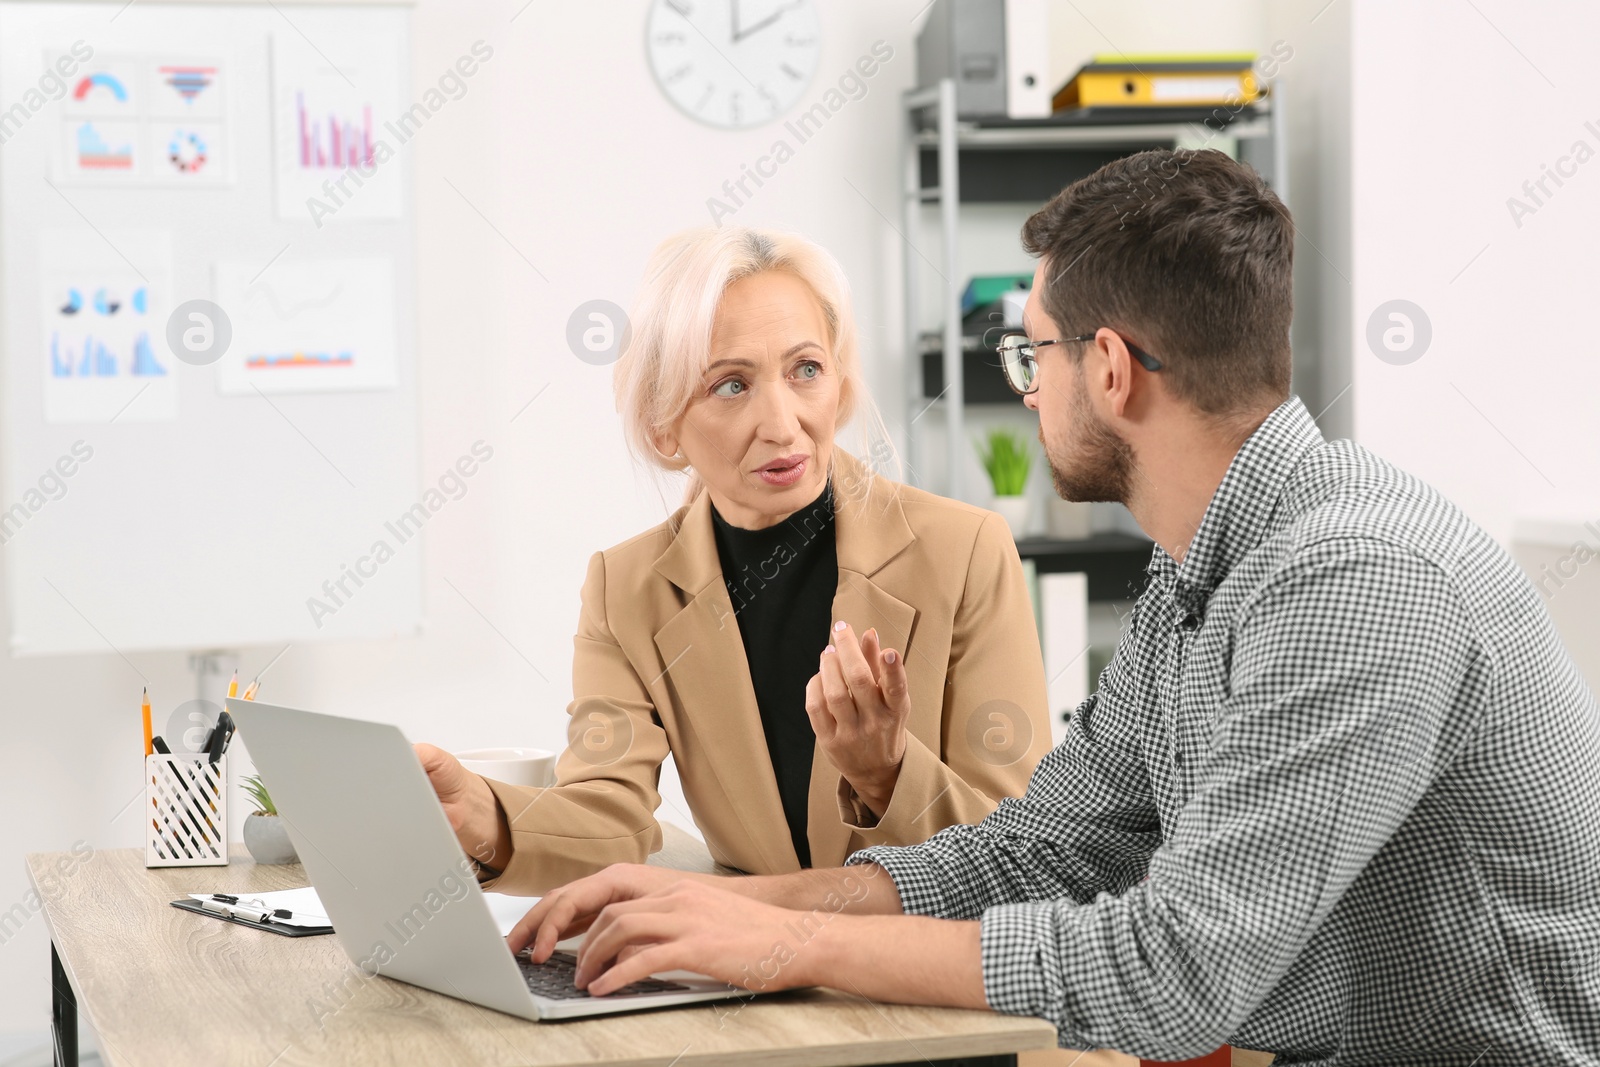 Photo of Boss and employee with laptop discussing work issues at wooden table in office